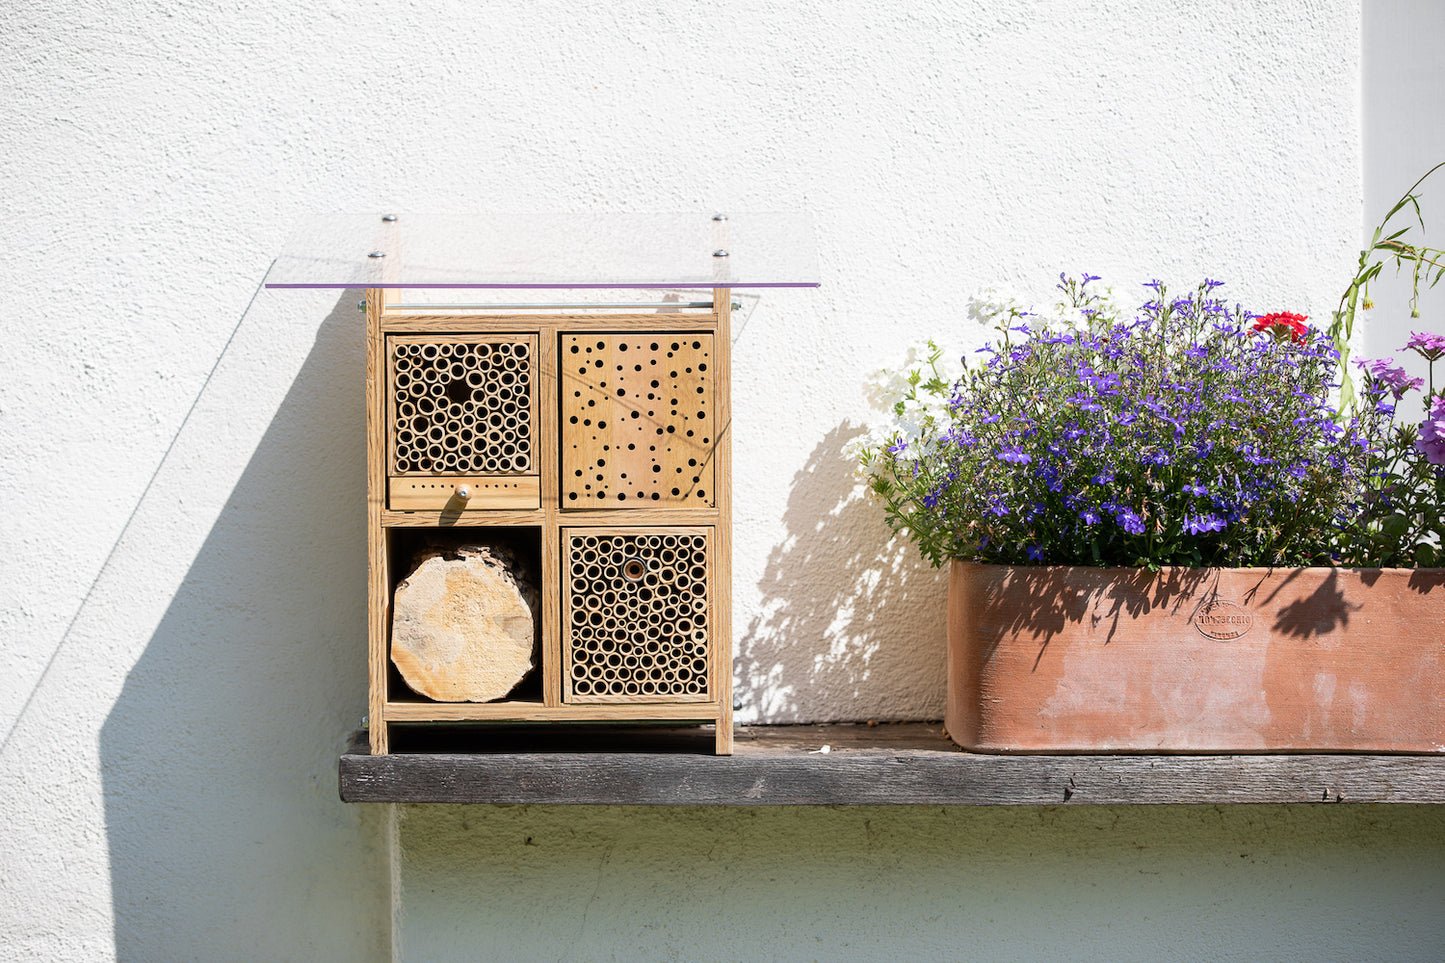 BeeHome by Pollinature